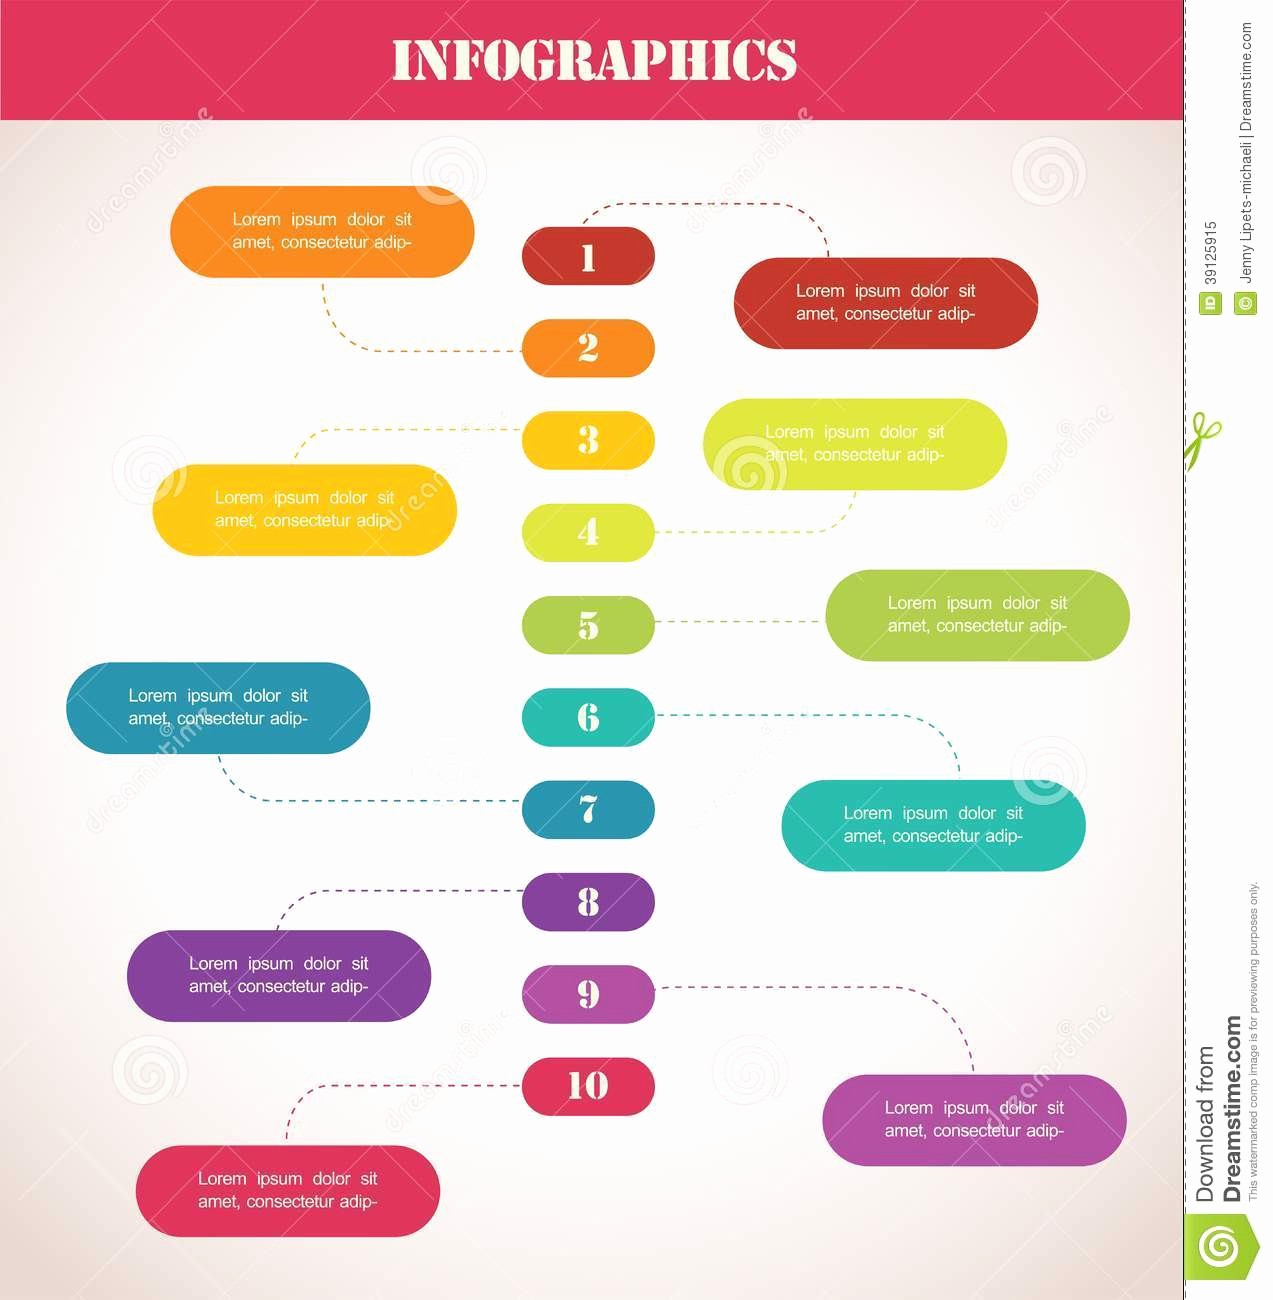 Free Infographic Templates for Word Awesome 14 Infographic Templates for Word Resume